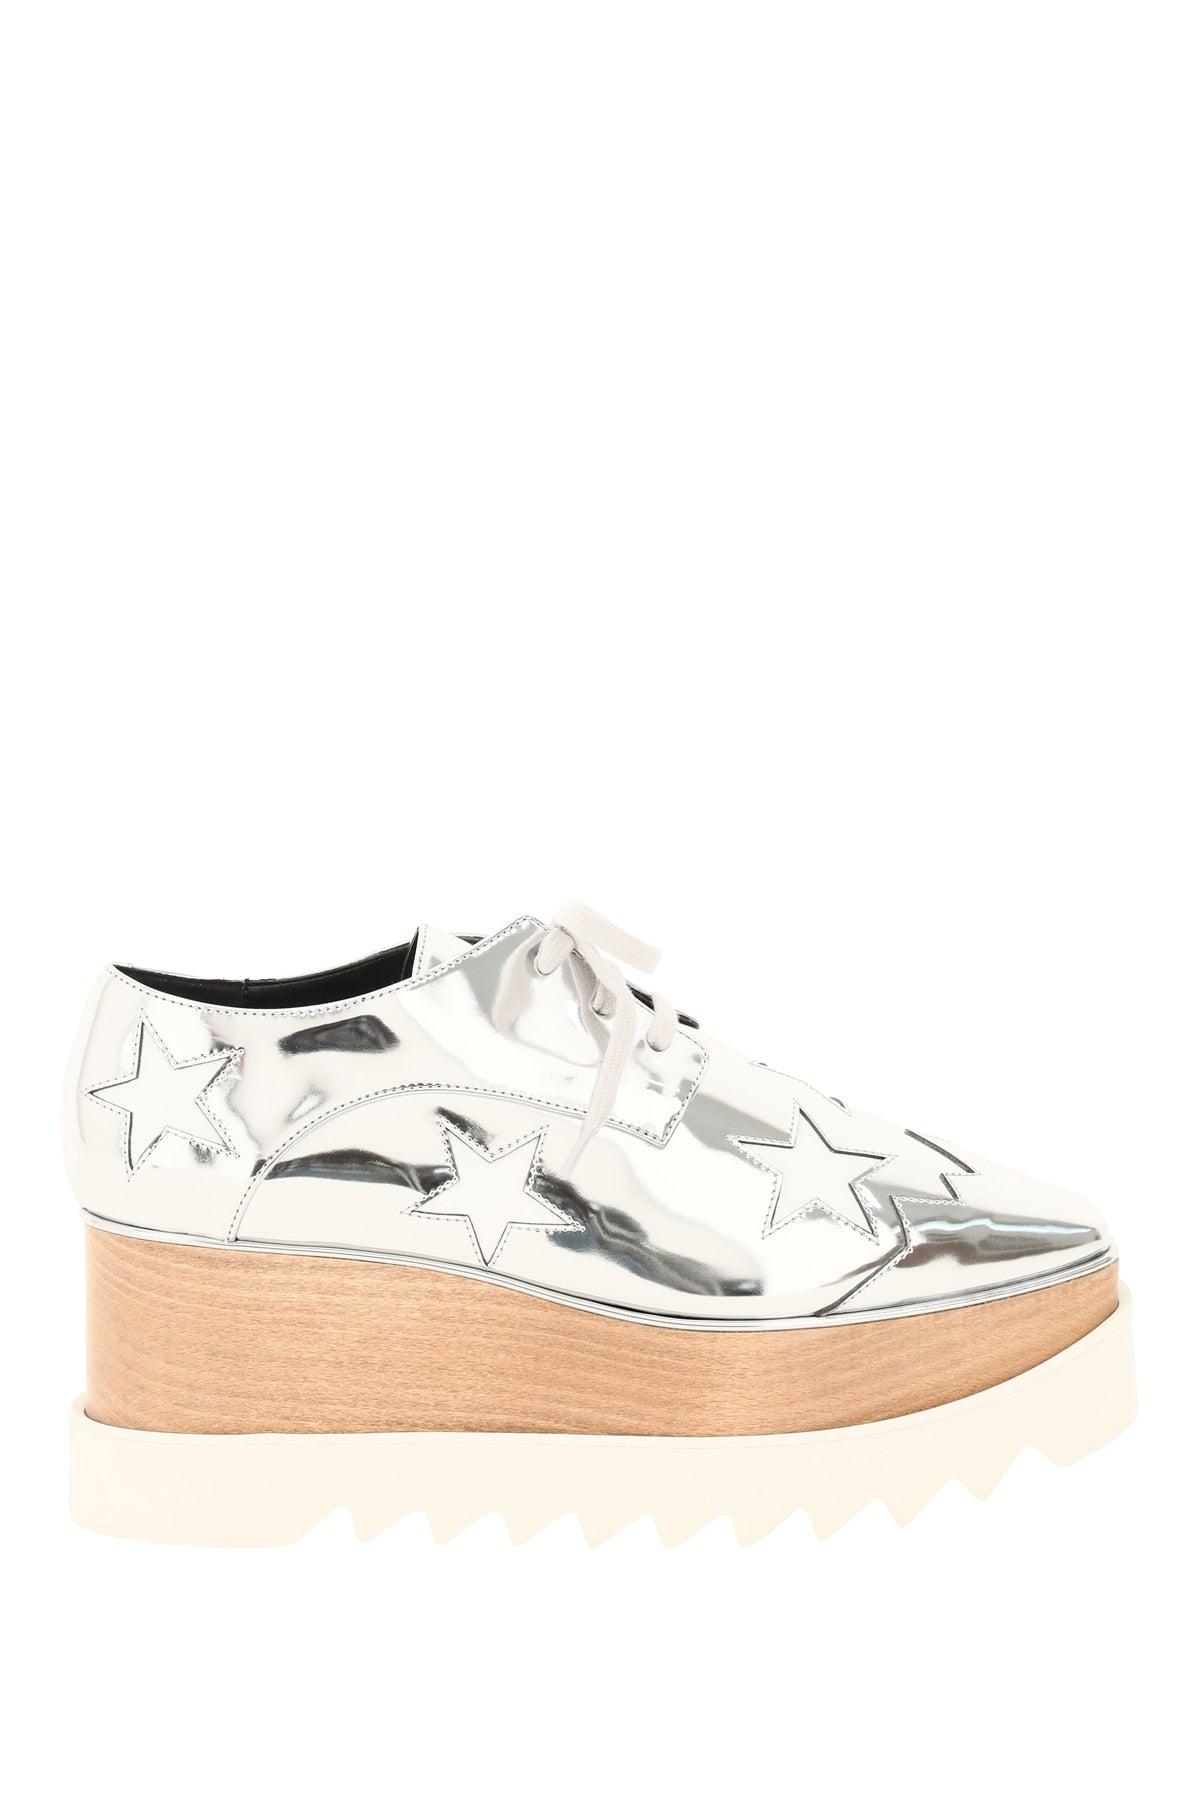 Stella McCartney Elyse Lace-up Shoes Silver,white Faux Leather | Lyst